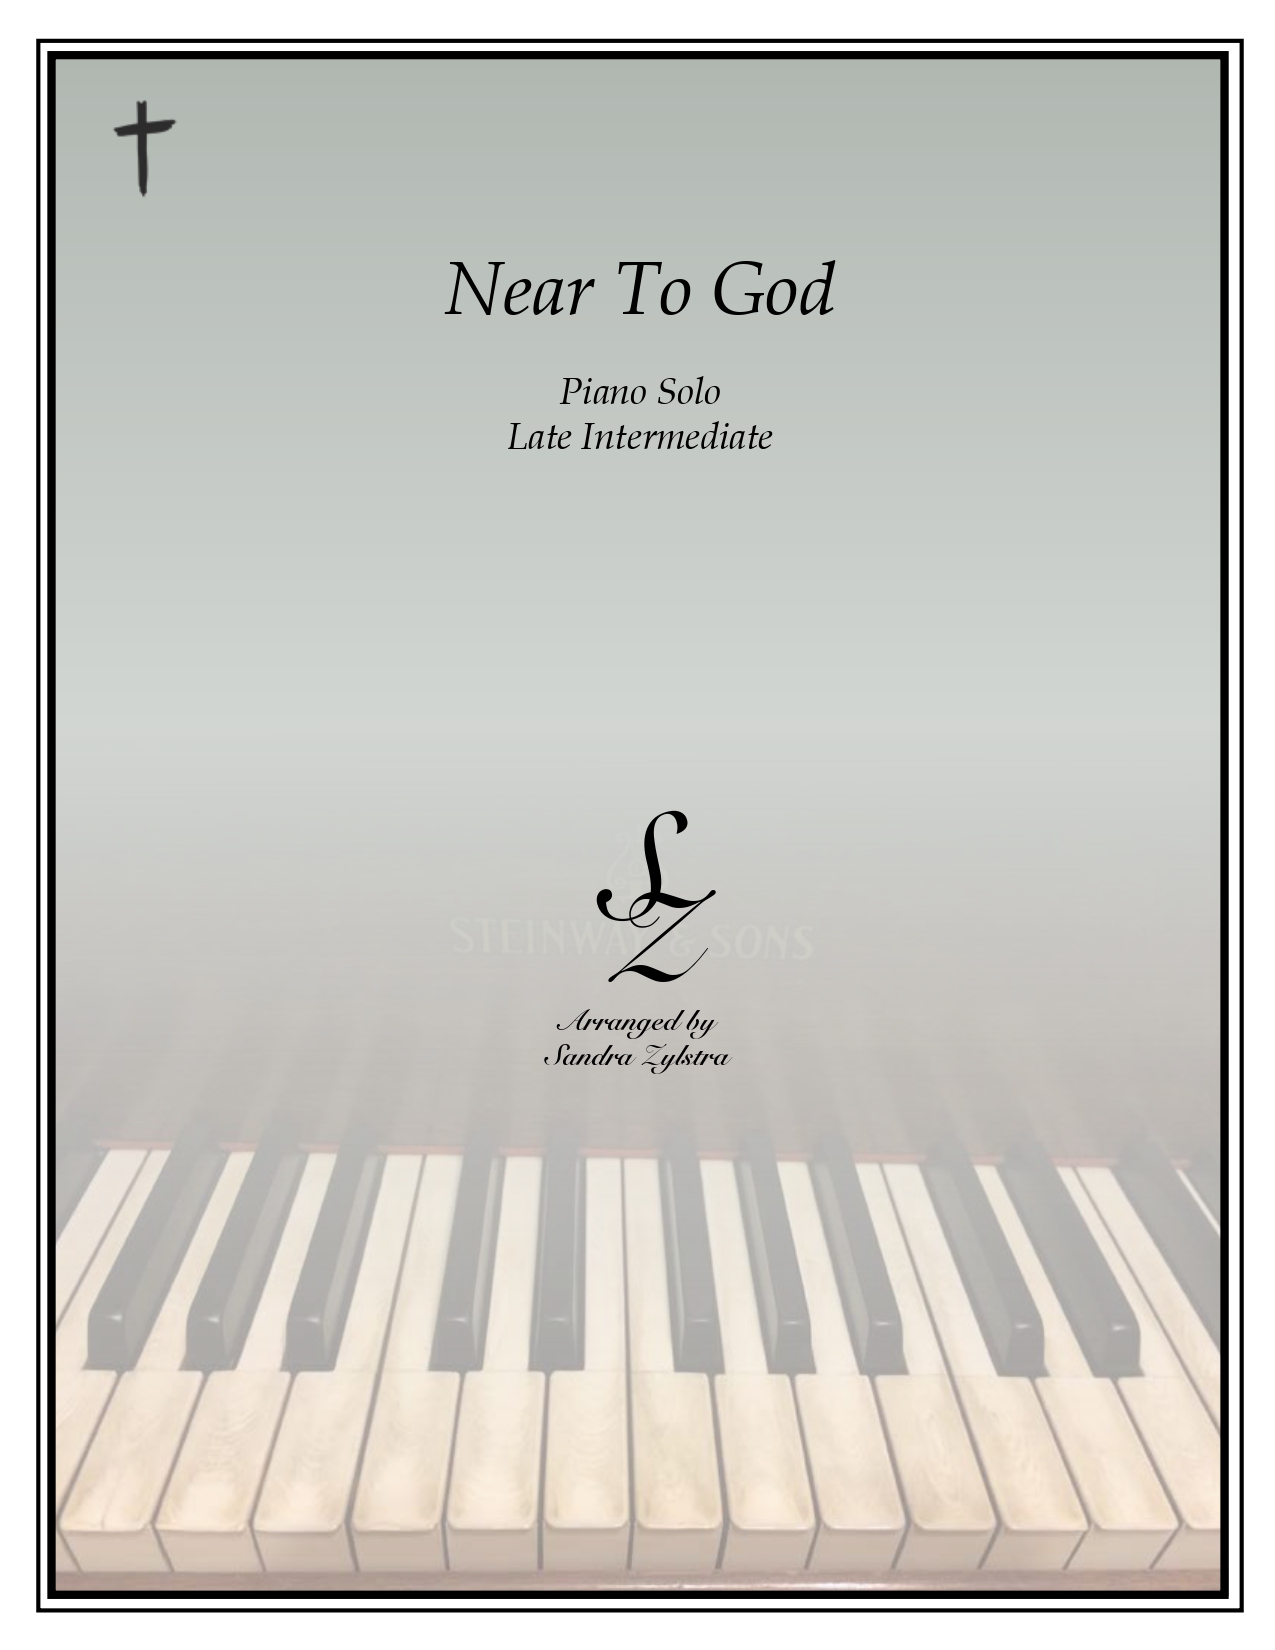 Near To God late intermediate piano cover page 00011